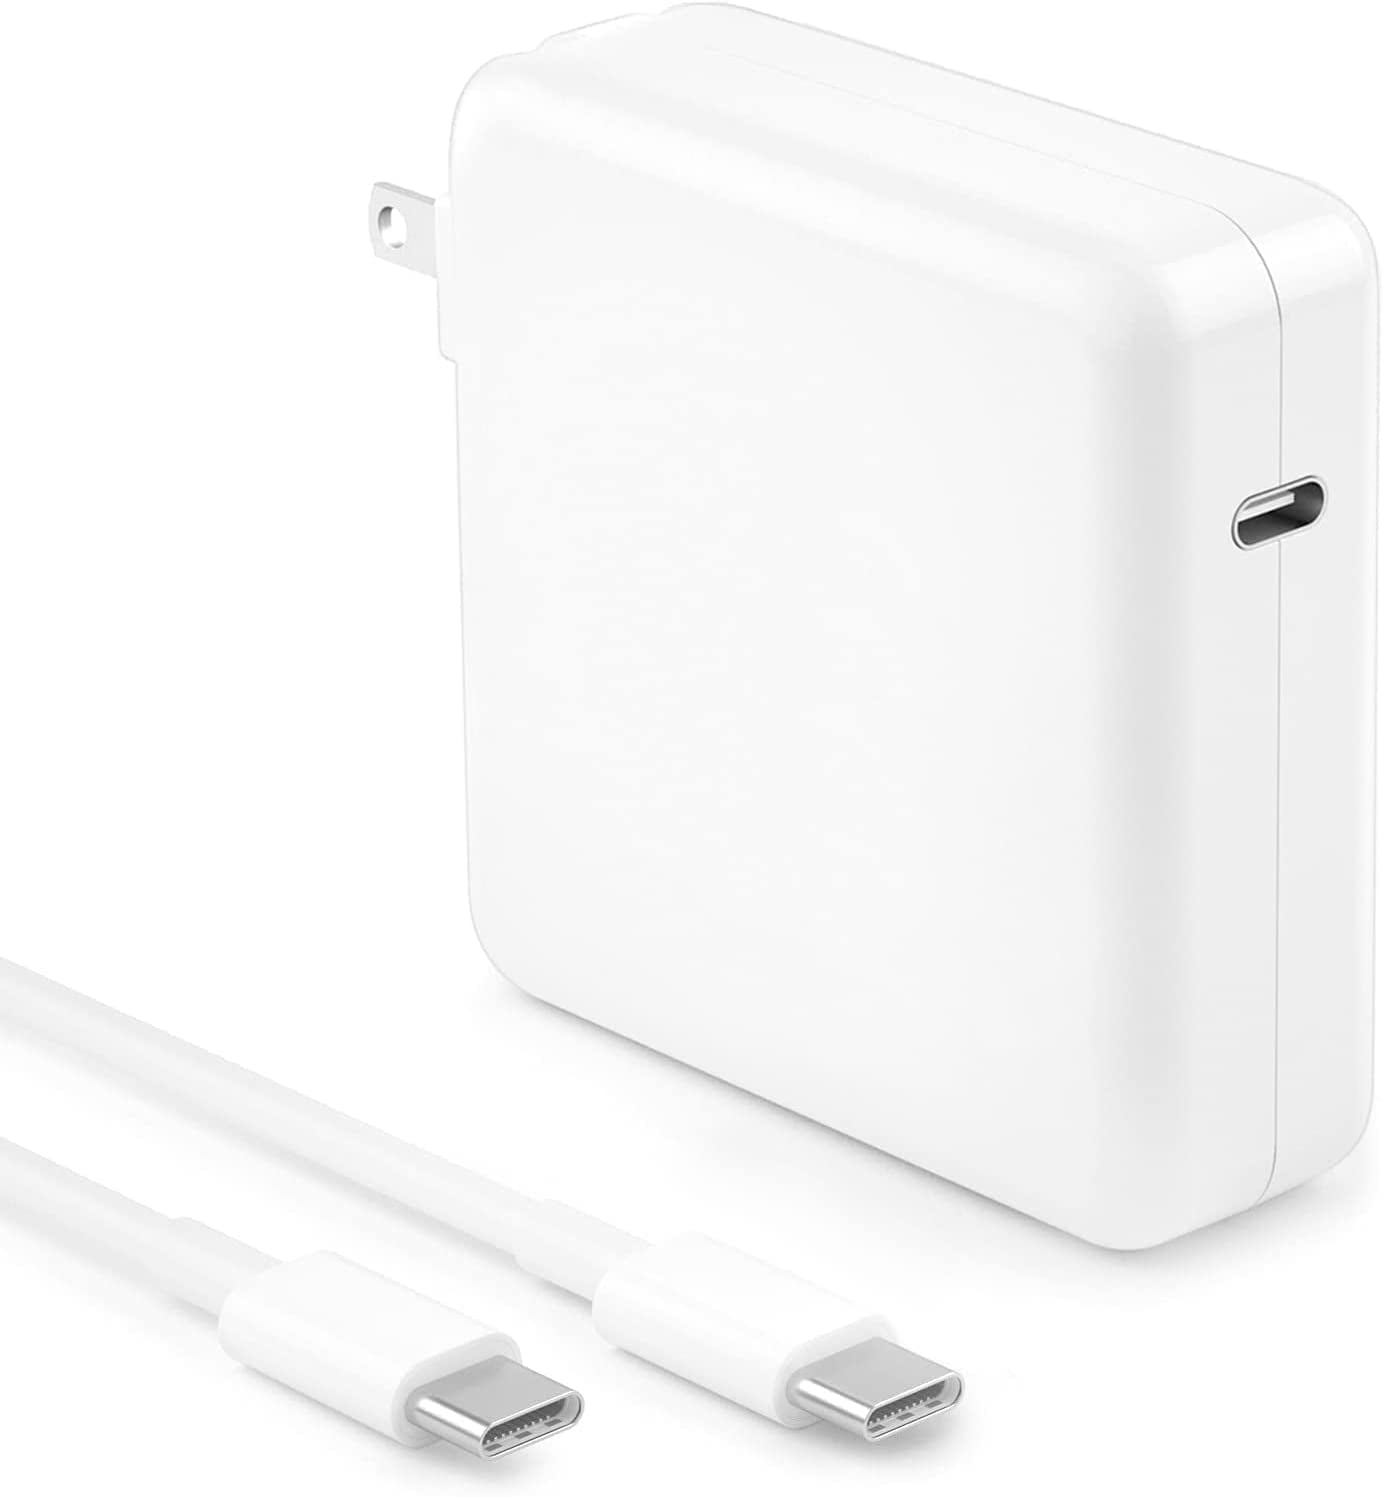 87W USB C Adapter, Mac Book Pro Mac Charger Compatible with MacBook Pro 13 15 Inch 2018/2019/2020, Air 2018/2019/2020 with USB C to C Cable - Walmart.com